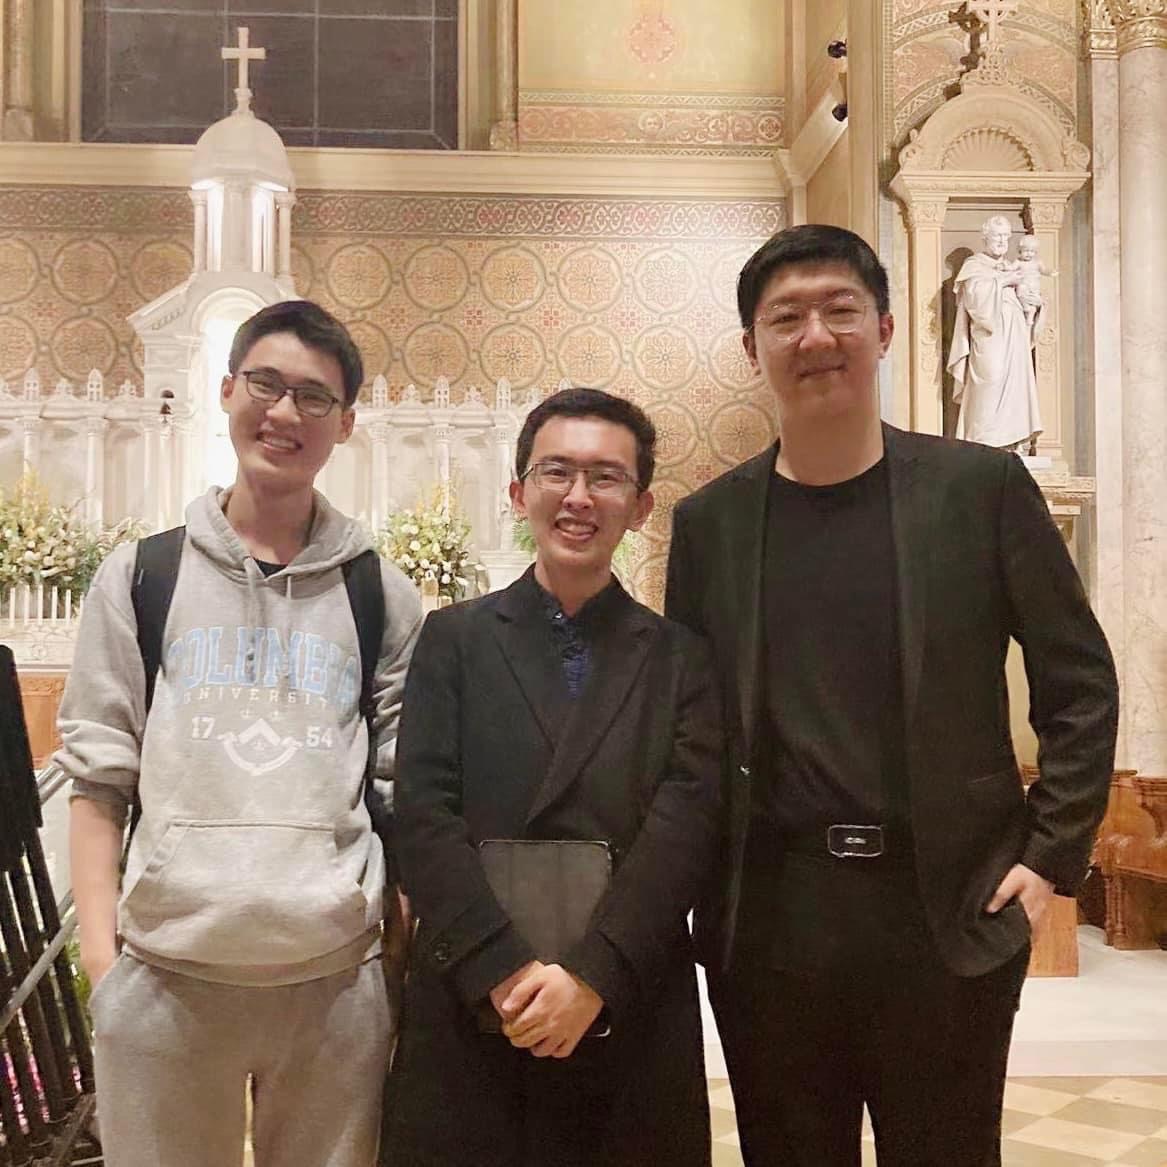 Zhenfeng really enjoyed the choir performance which has Frank and I in it! We are both from the Barnard-Columbia Chorus.